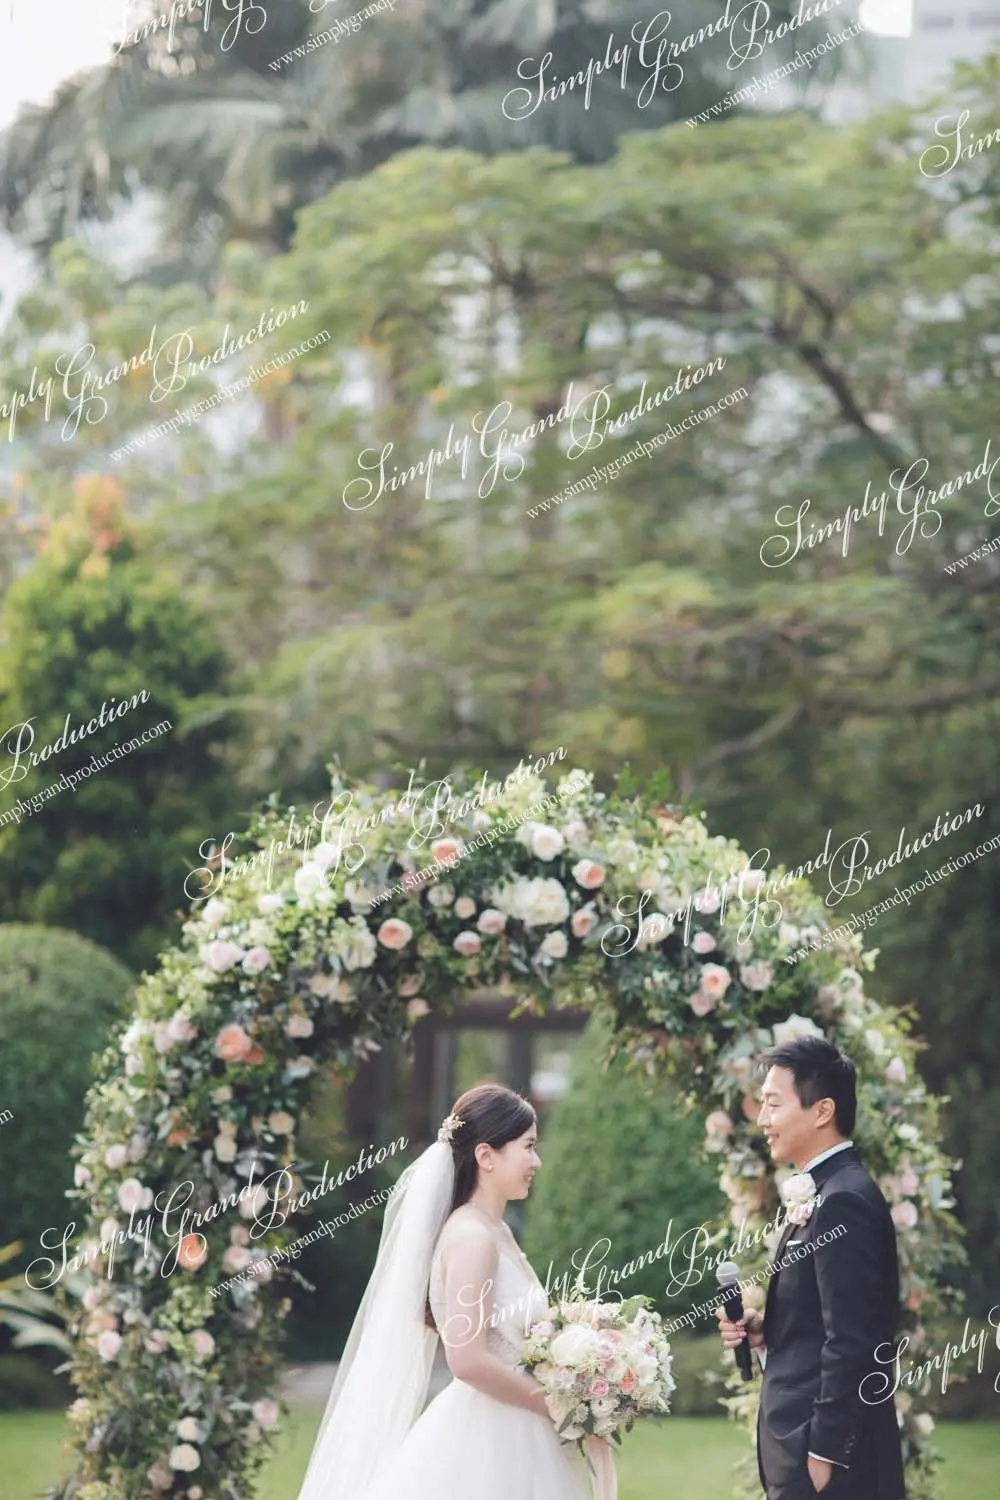 Simply_Grand_Production_Outdoor_wedding_decoration_rose_greenery_arch_Repulse_Bay_1_13.jpg